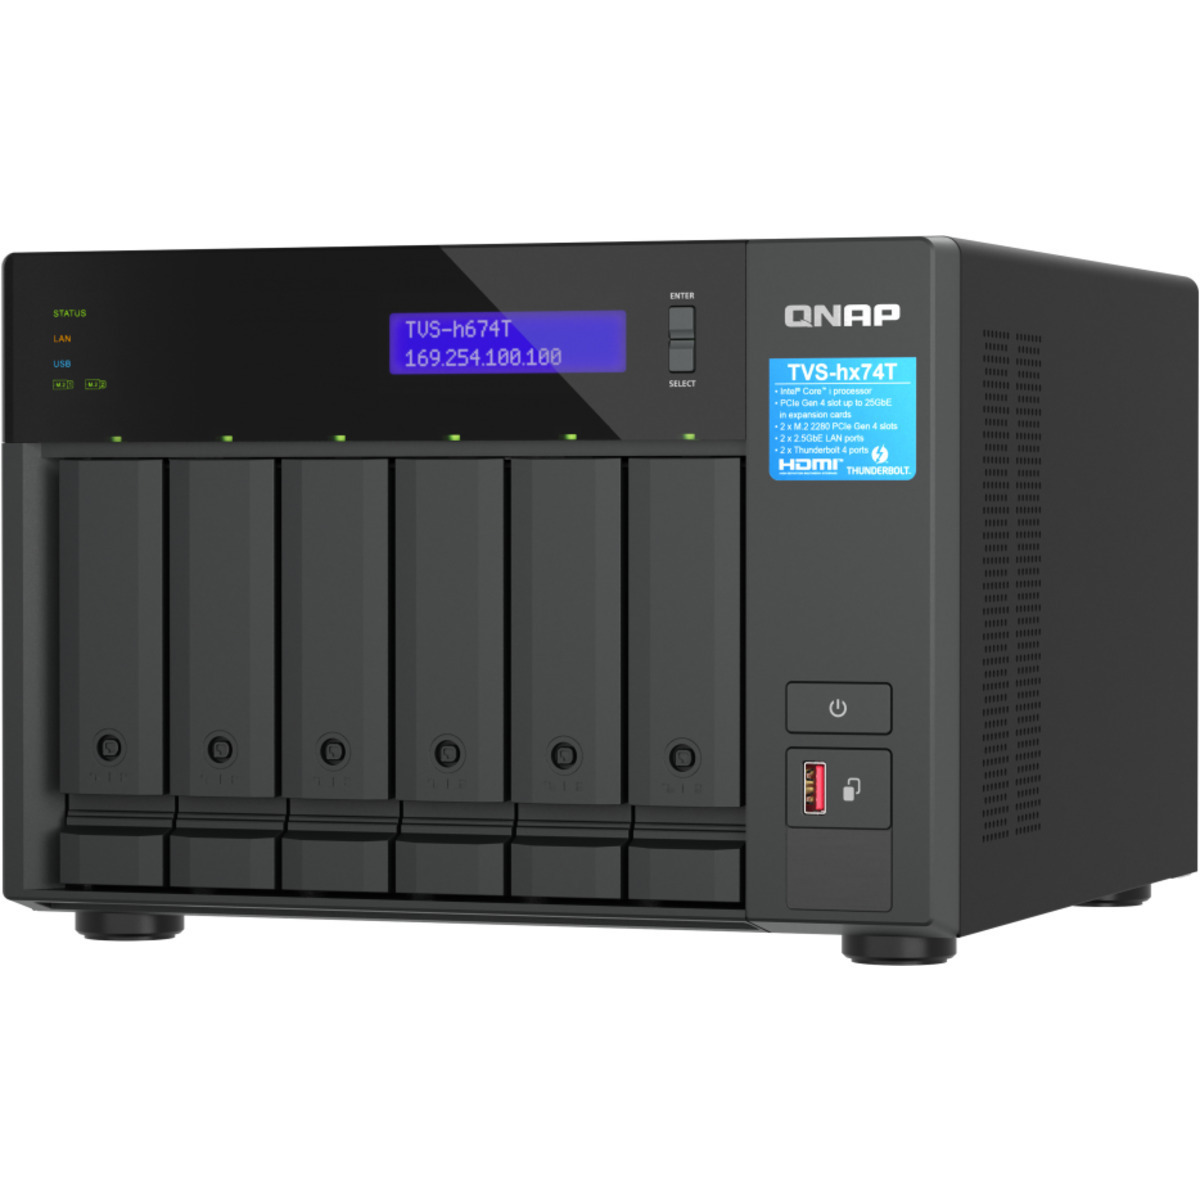 QNAP TVS-h674T Core i5 Thunderbolt 4 2tb 6-Bay Desktop Multimedia / Power User / Business DAS-NAS - Combo Direct + Network Storage Device 4x500gb Sandisk Ultra 3D SDSSDH3-500G 2.5 560/520MB/s SATA 6Gb/s SSD CONSUMER Class Drives Installed - Burn-In Tested TVS-h674T Core i5 Thunderbolt 4